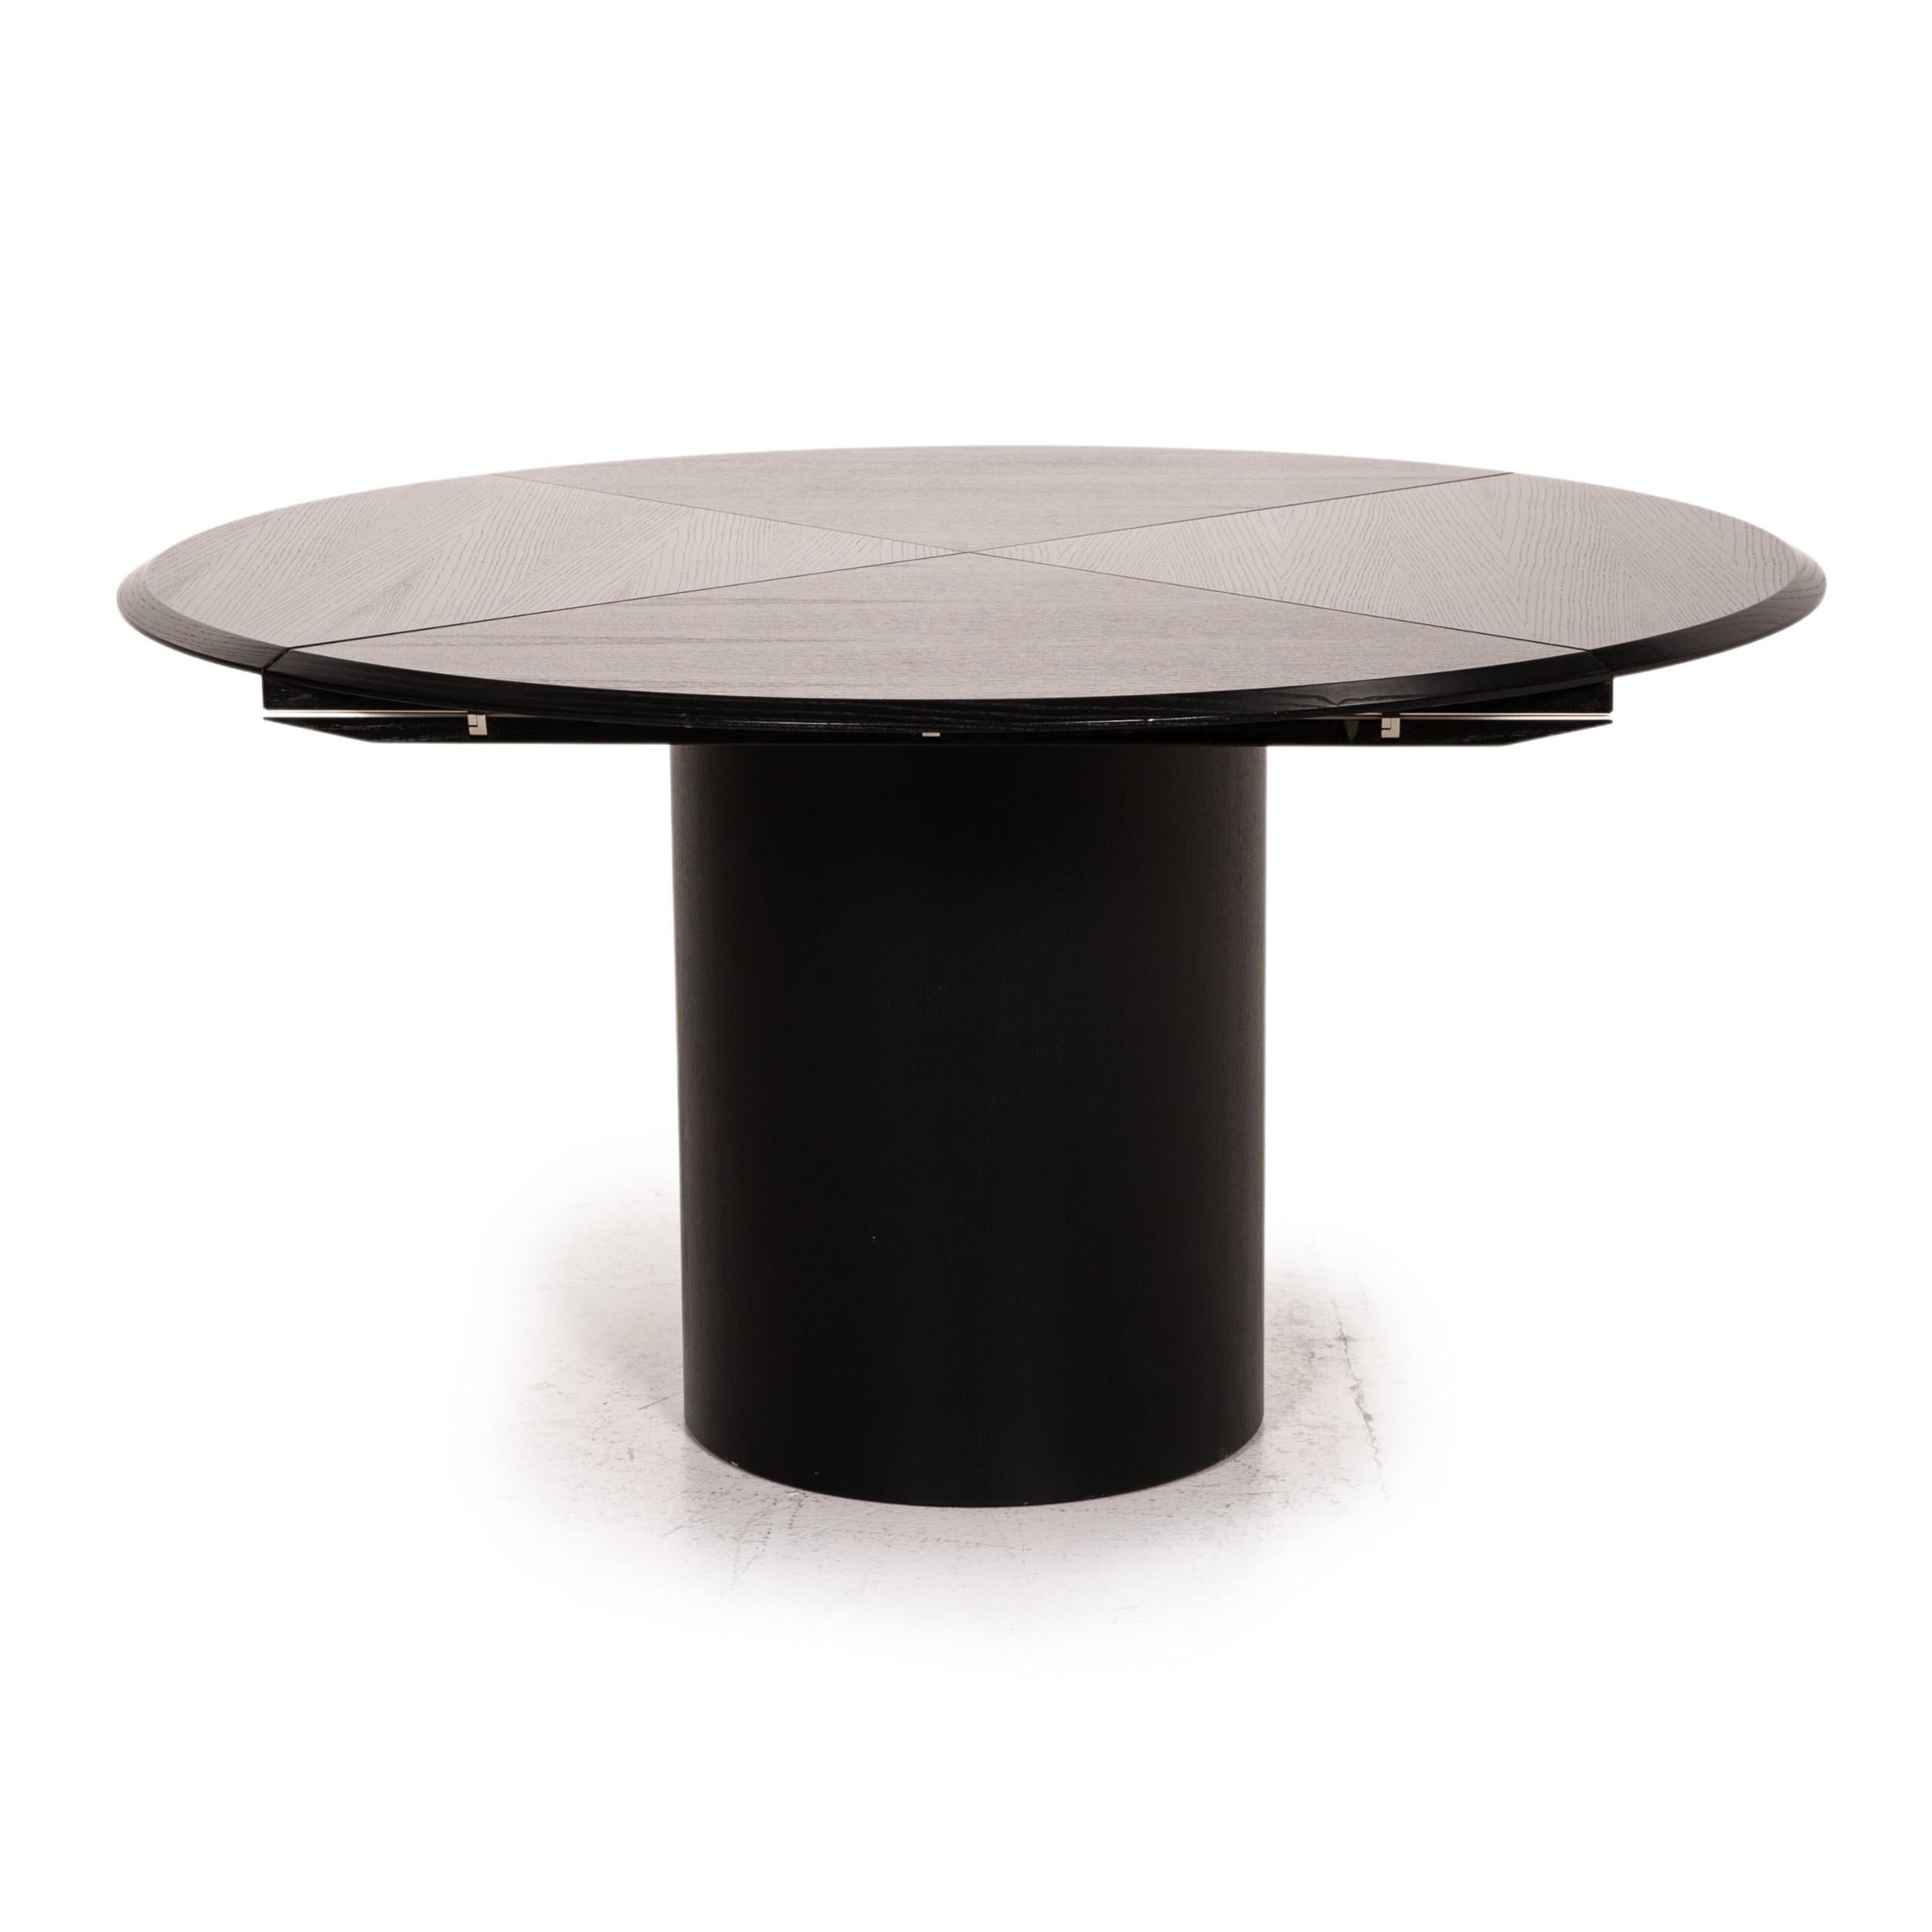 Rosenthal Quadrondo Dining Table Round Black and White Foldable Function Square 4